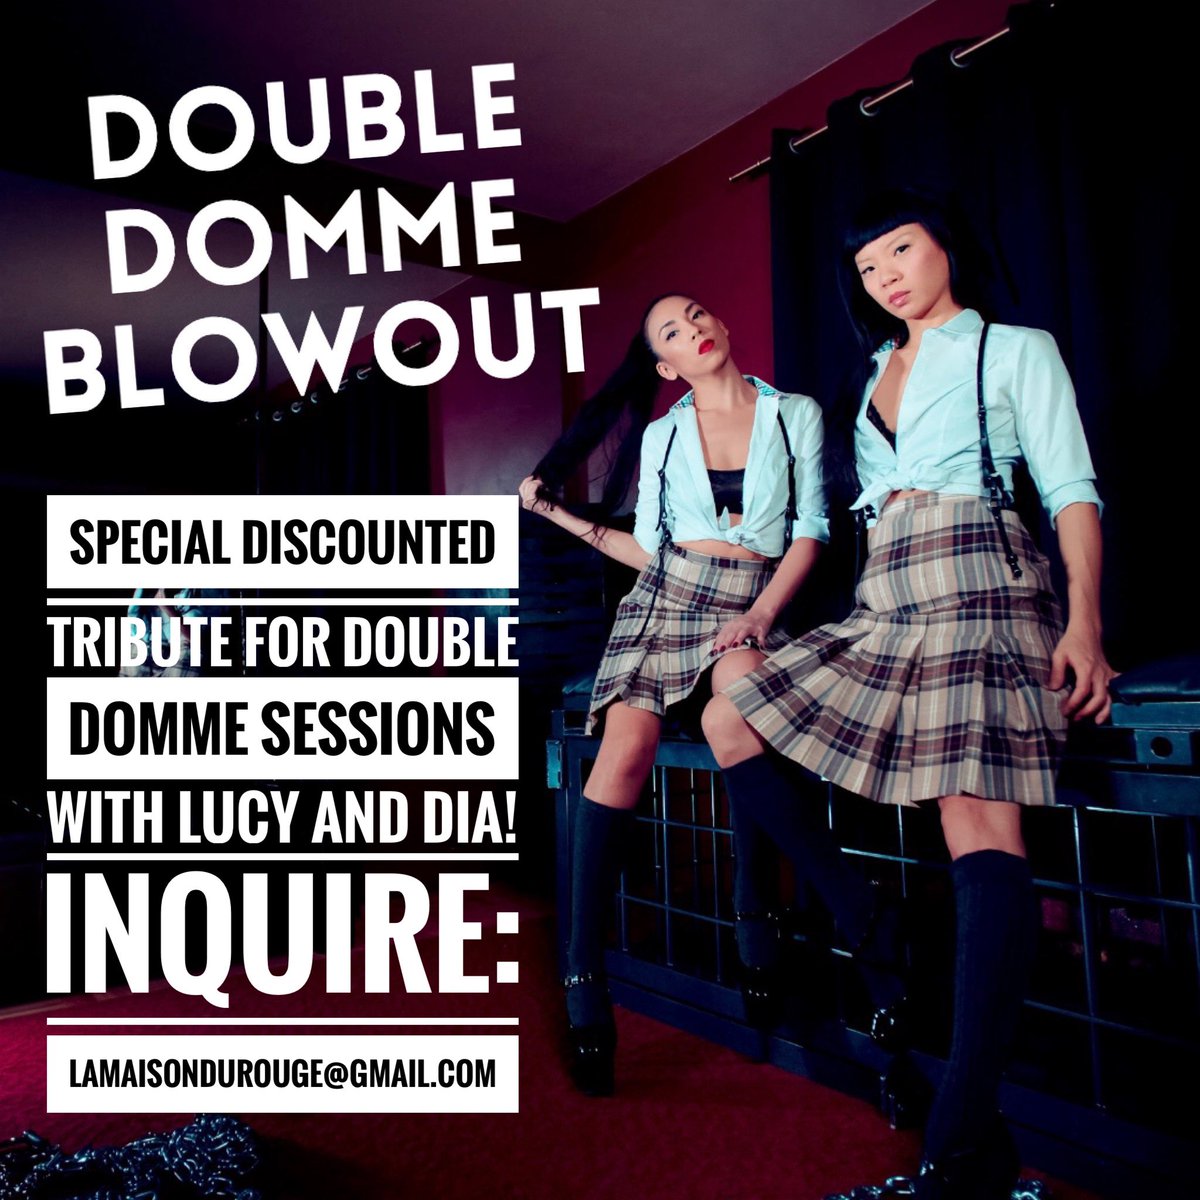 We’ve come a long way in the last 6 years and want to celebrate with YOU! 🎈🎈🎈🎈🎈🎈🎈🎈 Double Domme Blowout begins today! Inquire for details: lamaisondurouge@gmail.com